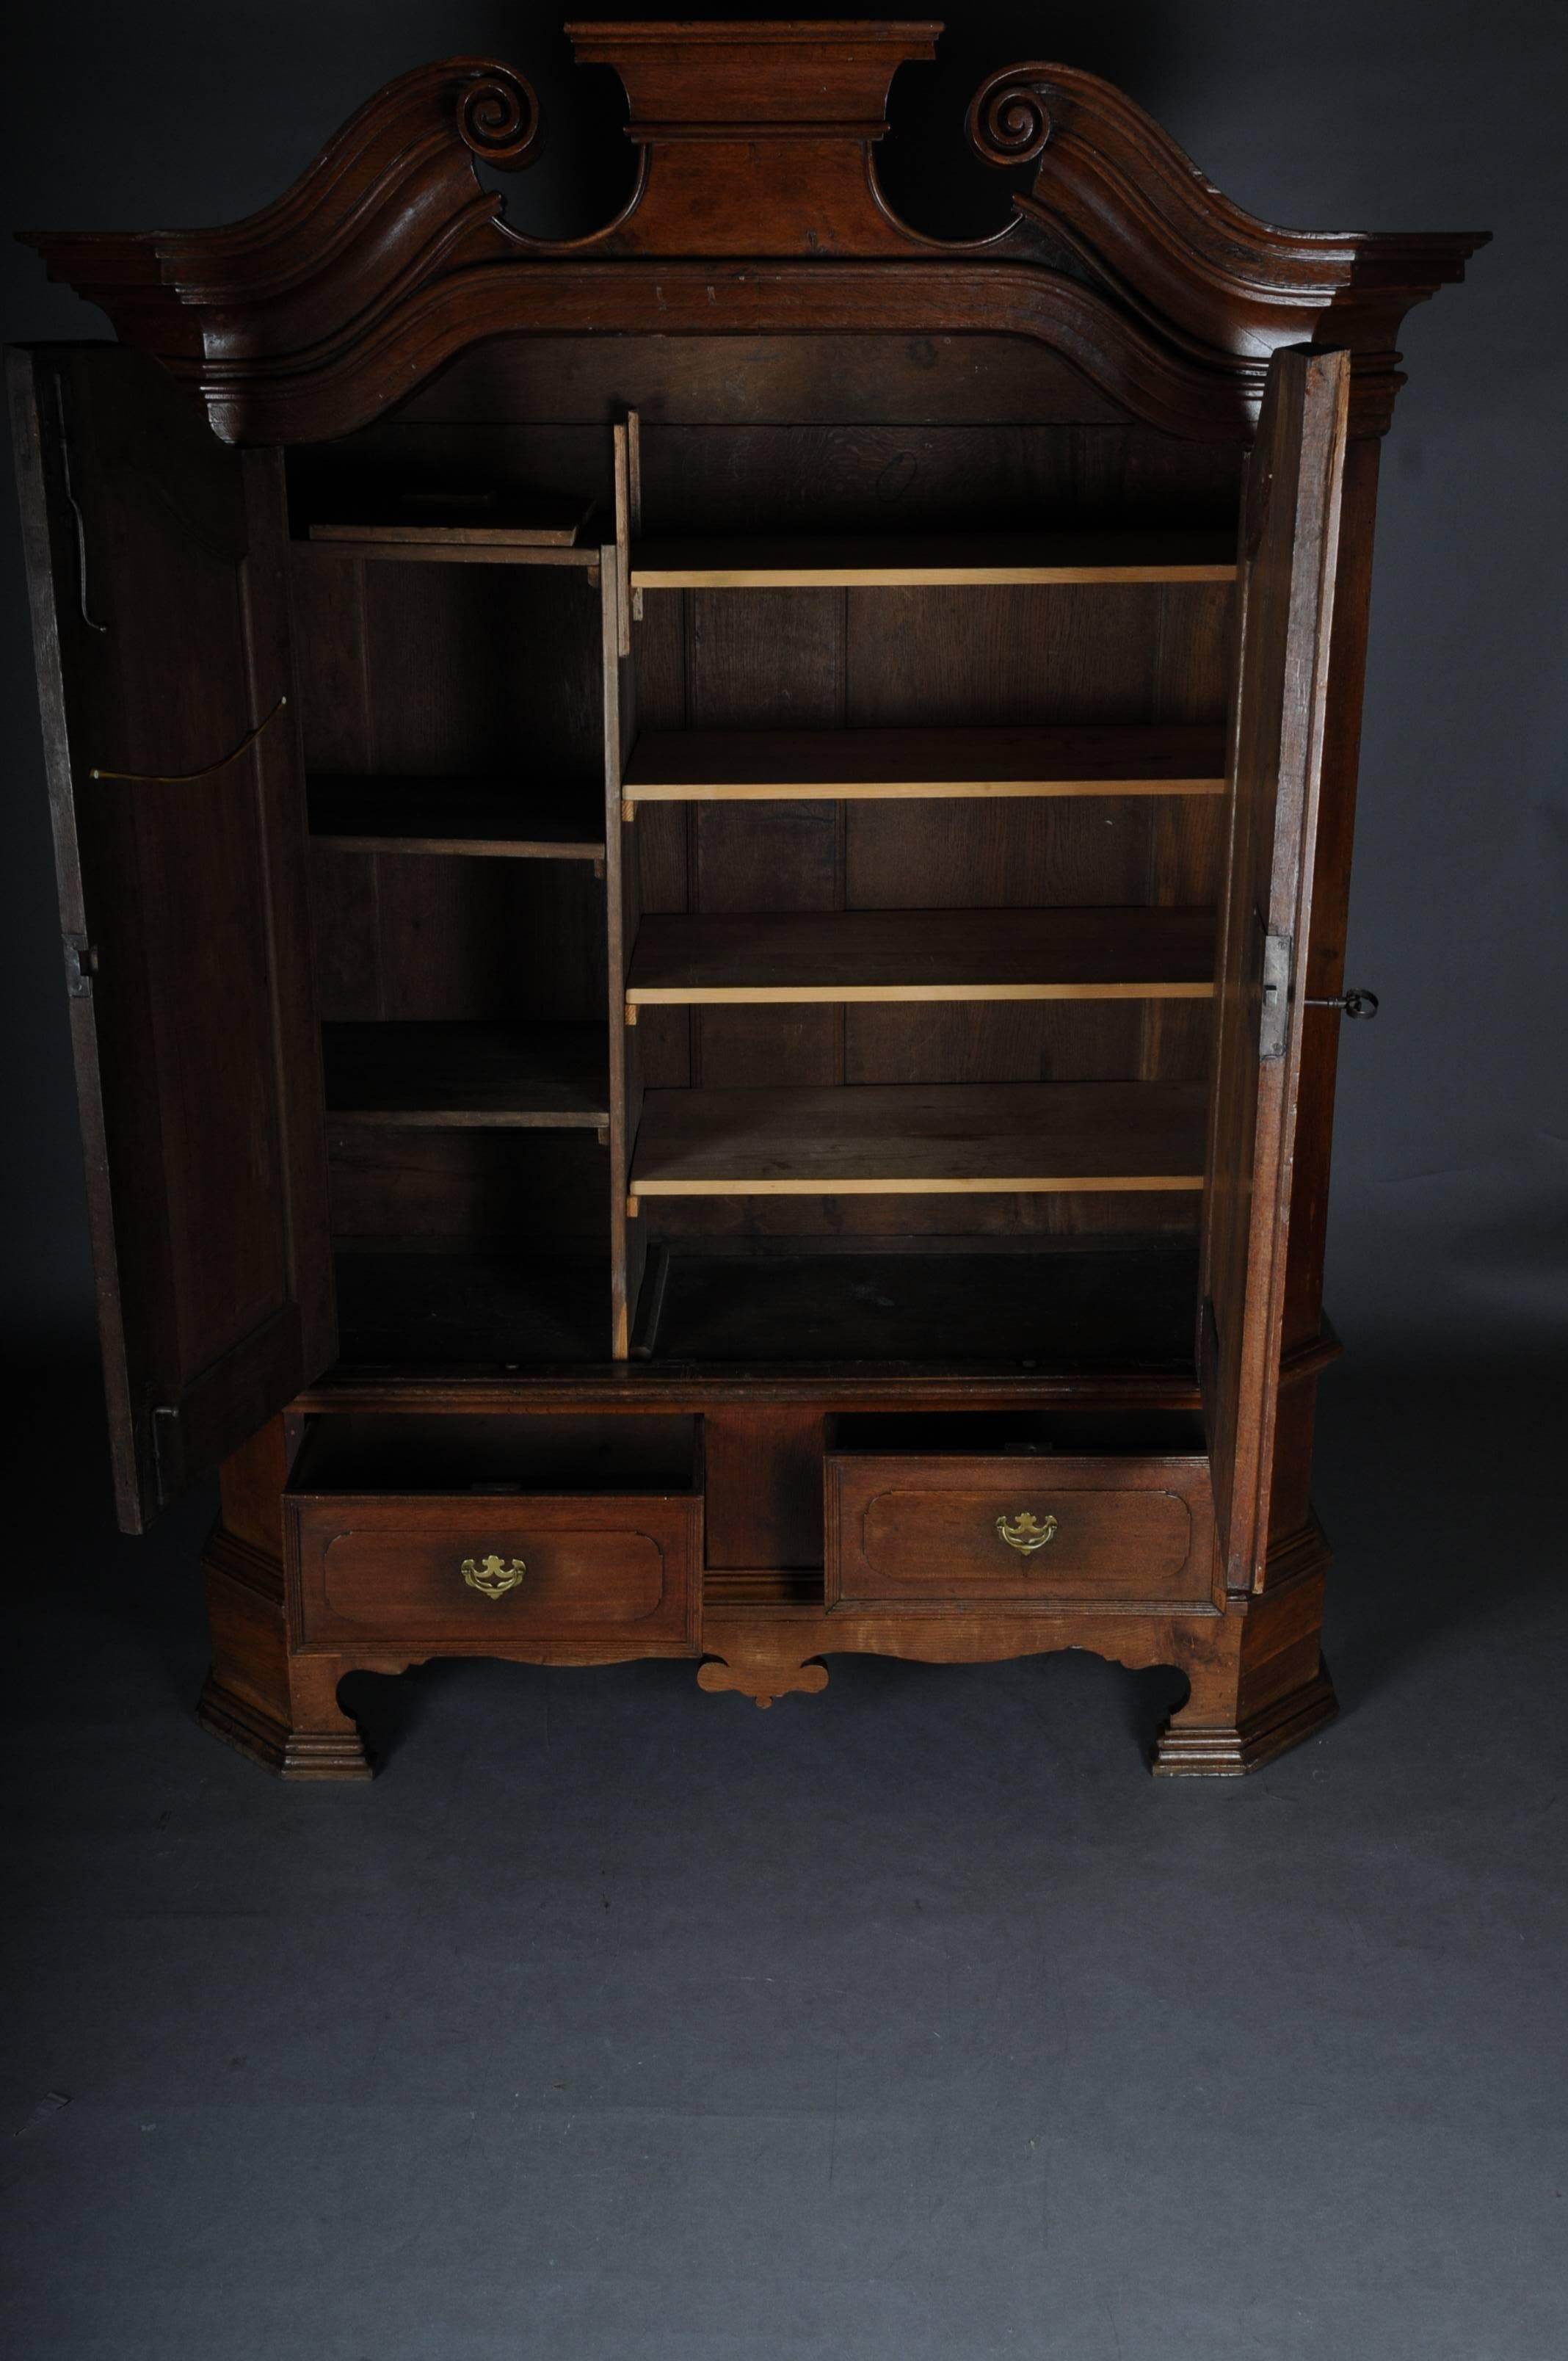 Solid oak. Two-door as well as two drawers below.
Original lock and key available, Germany, 1760.

(O-227).